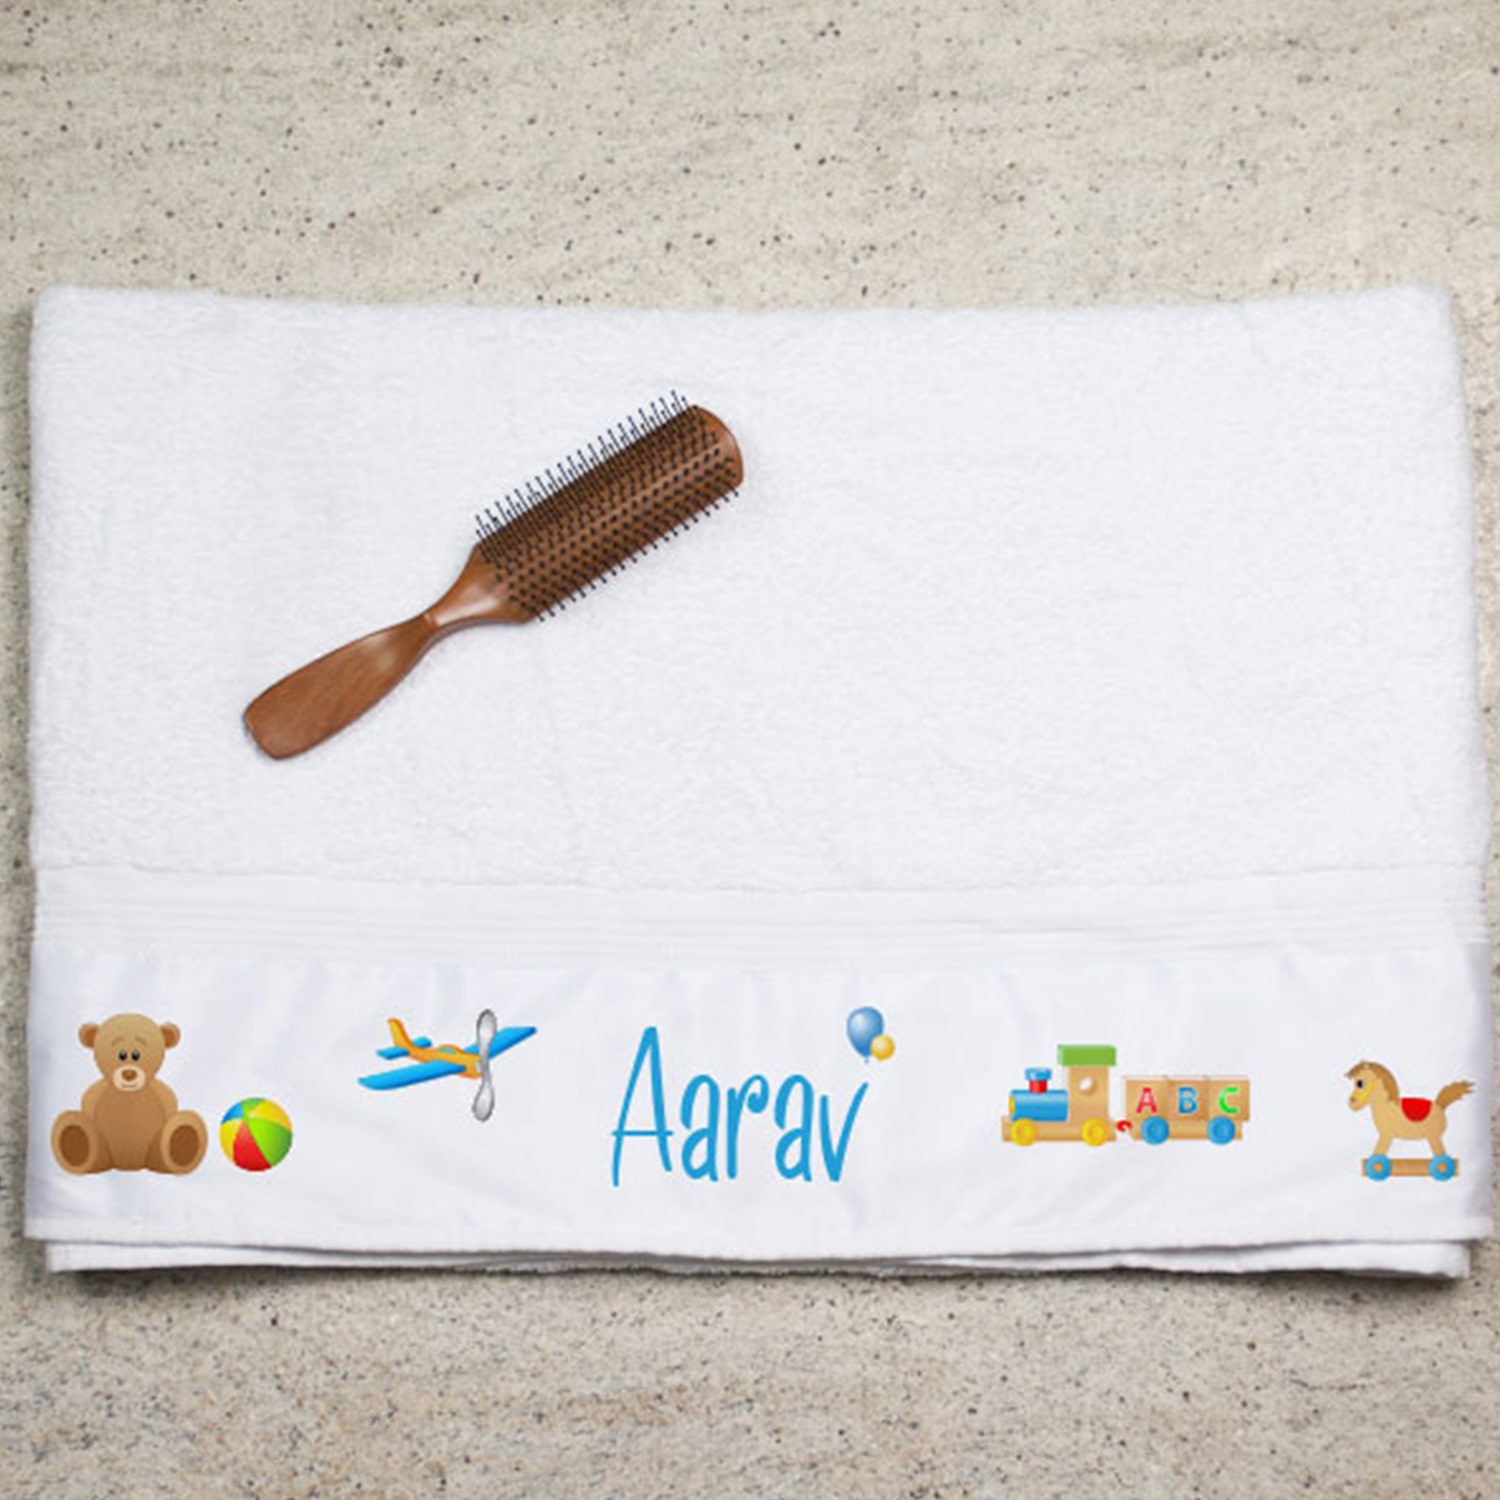 Handsome Hunk Personalized Bath Towel